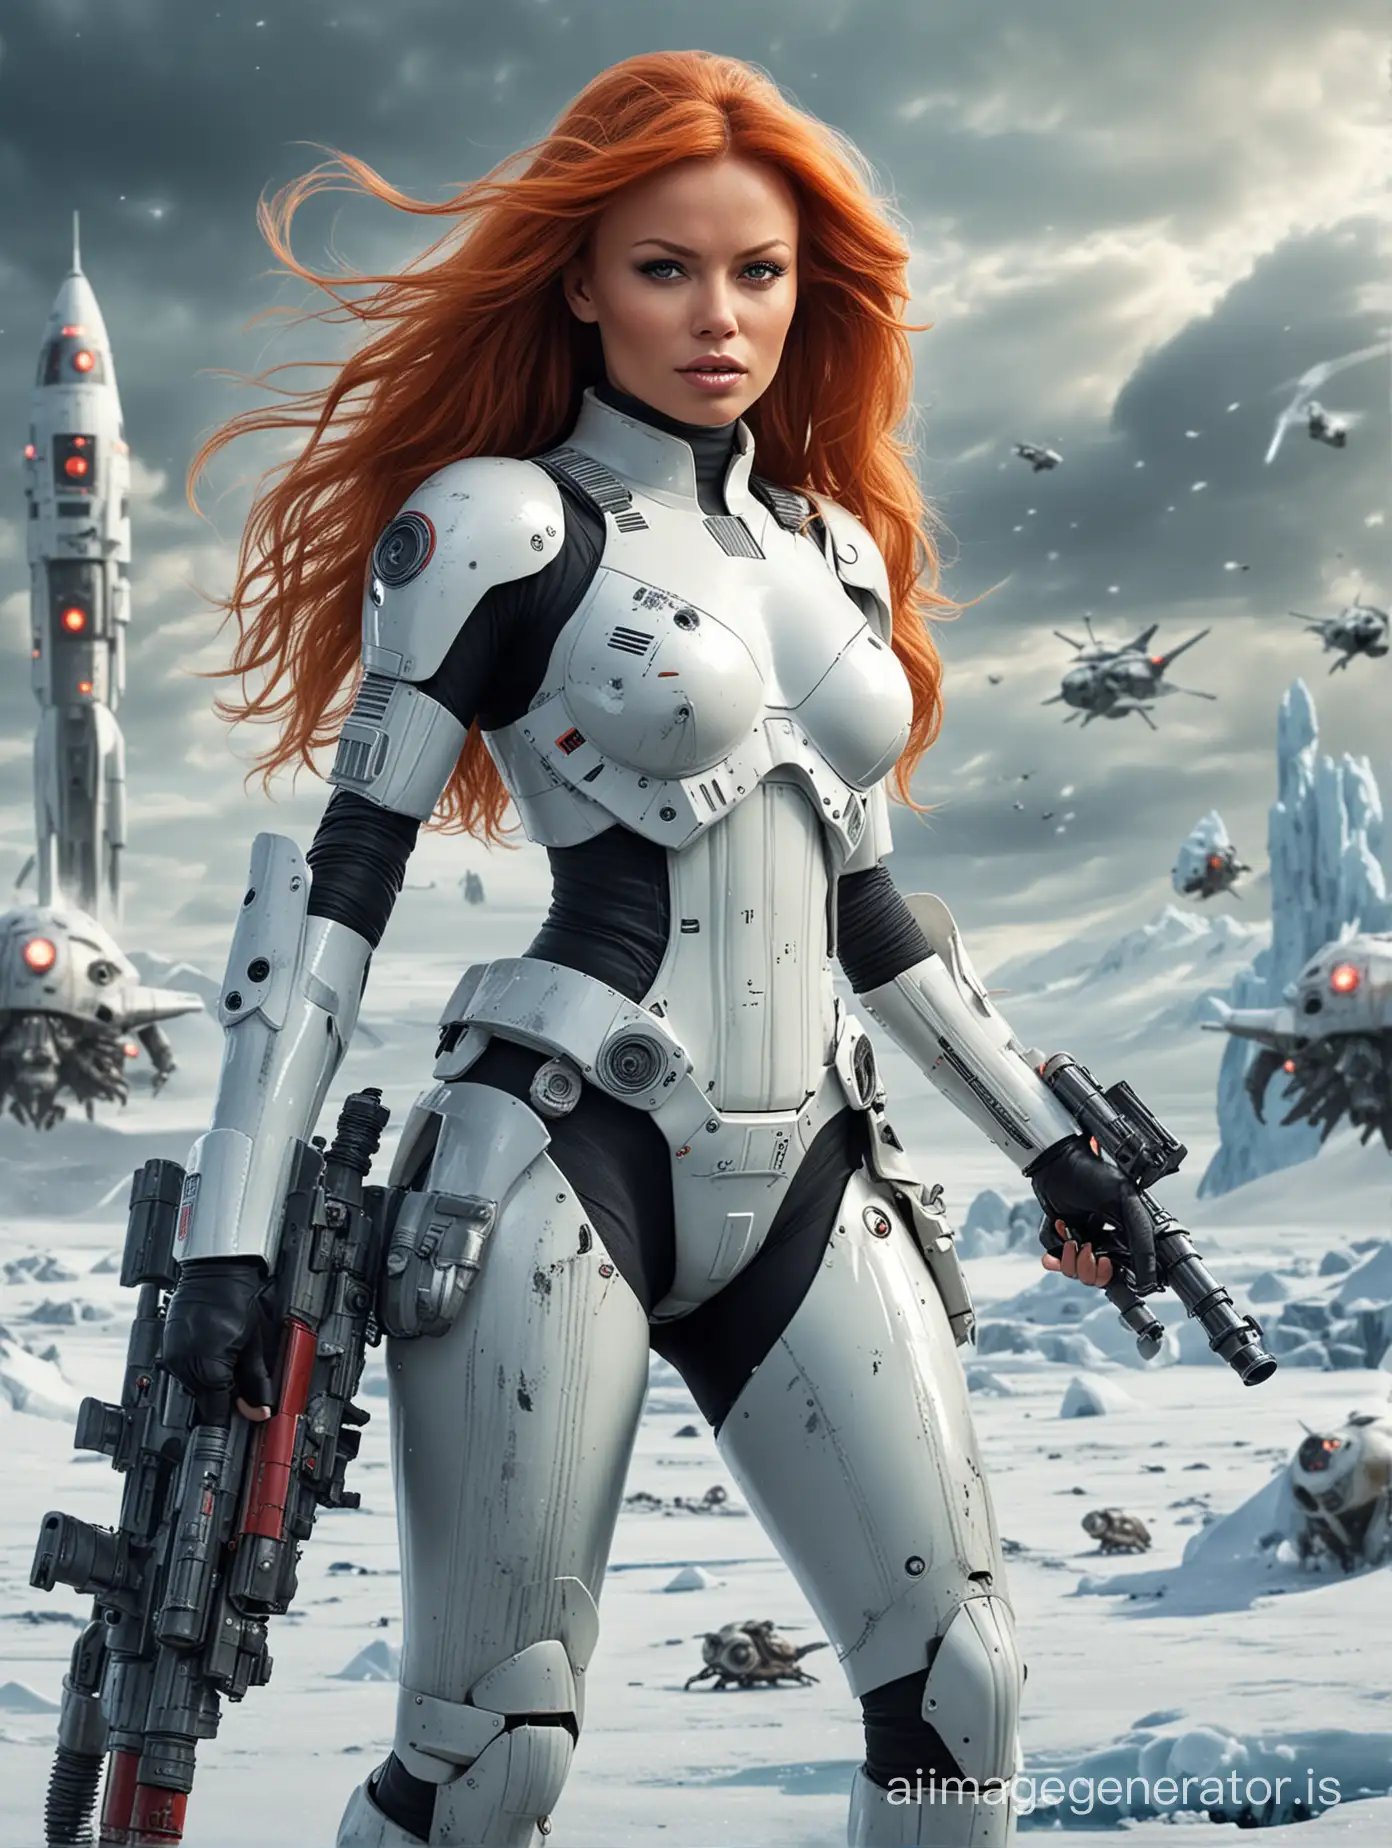 Young Pamela Anderson. full body woman riding a rocket pulled by snails. very long red hair. Stormtrooper armor, outfit, gear, helmet and light saber. Epic background battle with spaceships and troops. frozen arctic background